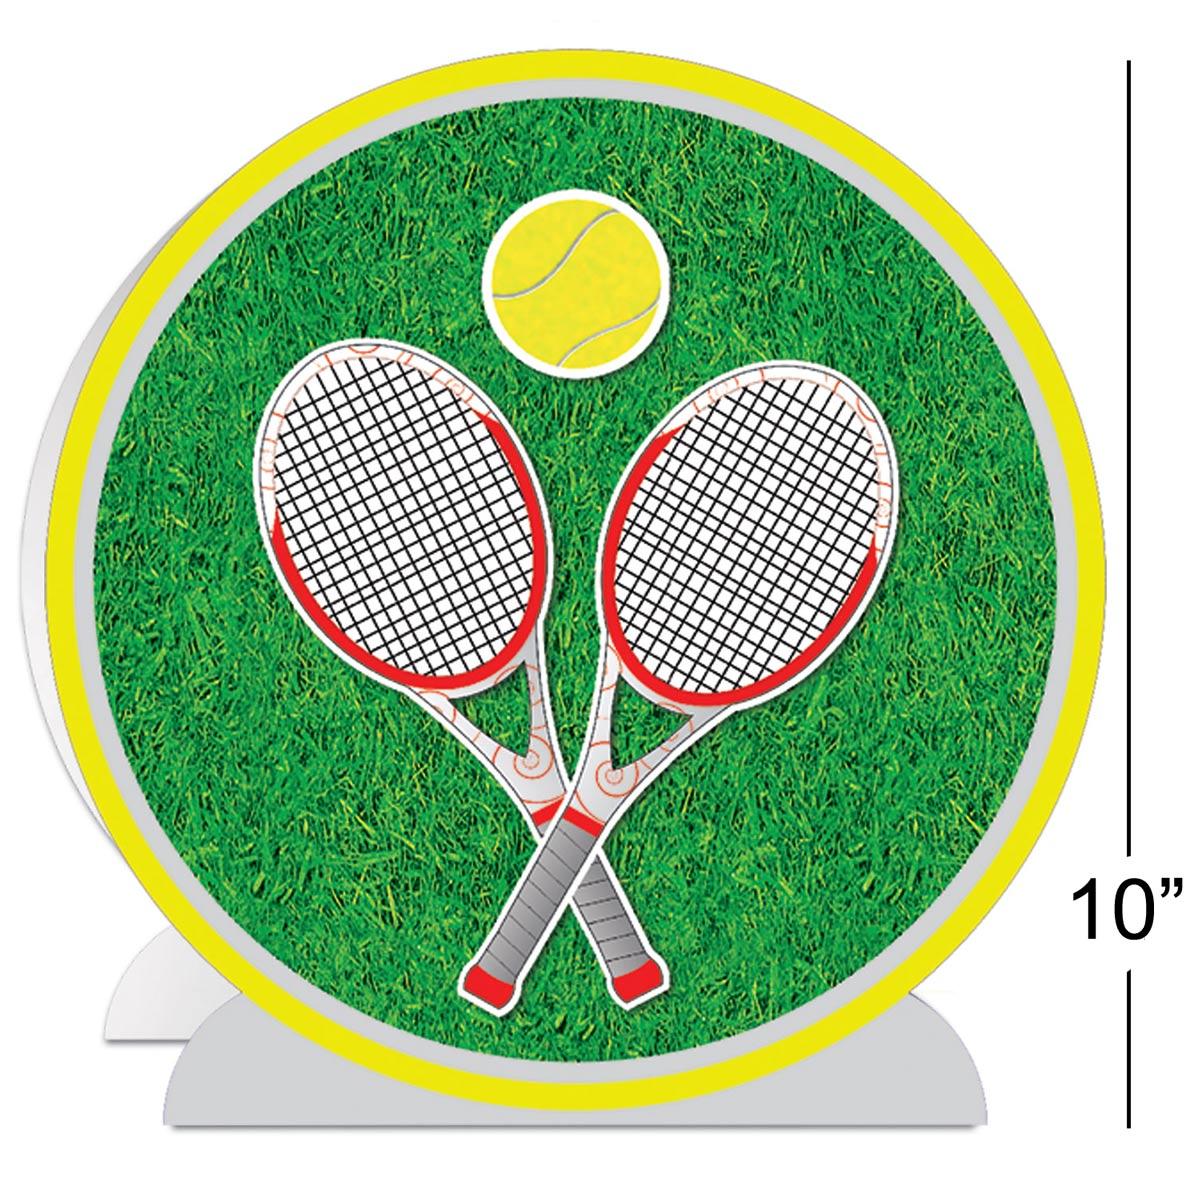 3D Tennis Centerpiece or Wimbledon Themed Tablecentre standing 10" tall by Beistle 54736 and available here at Karnival Costumes online party shop